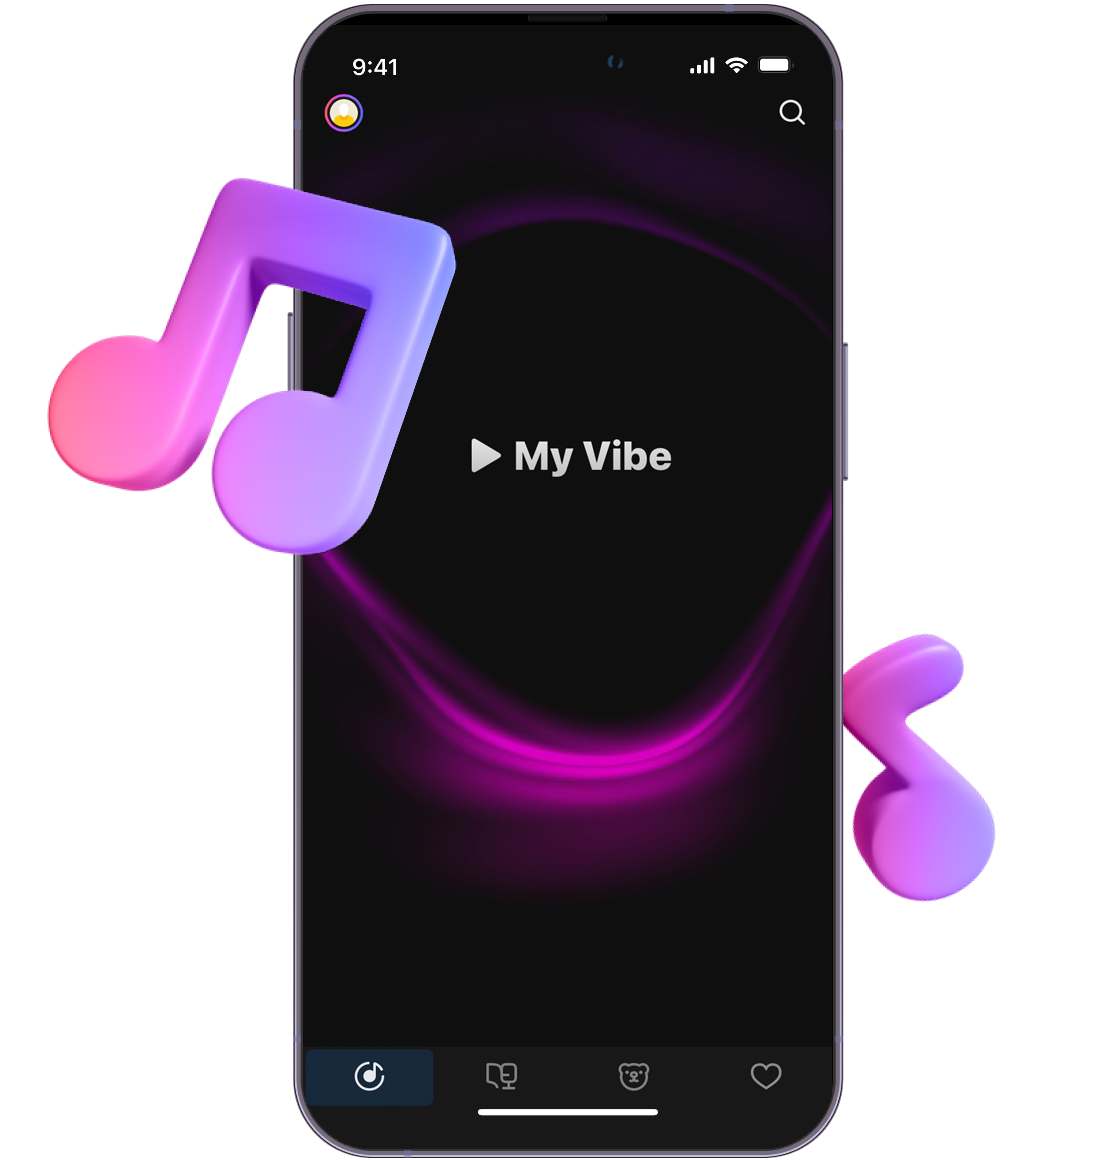 Unique recommendation system "My vibe", podcasts and audiobooks